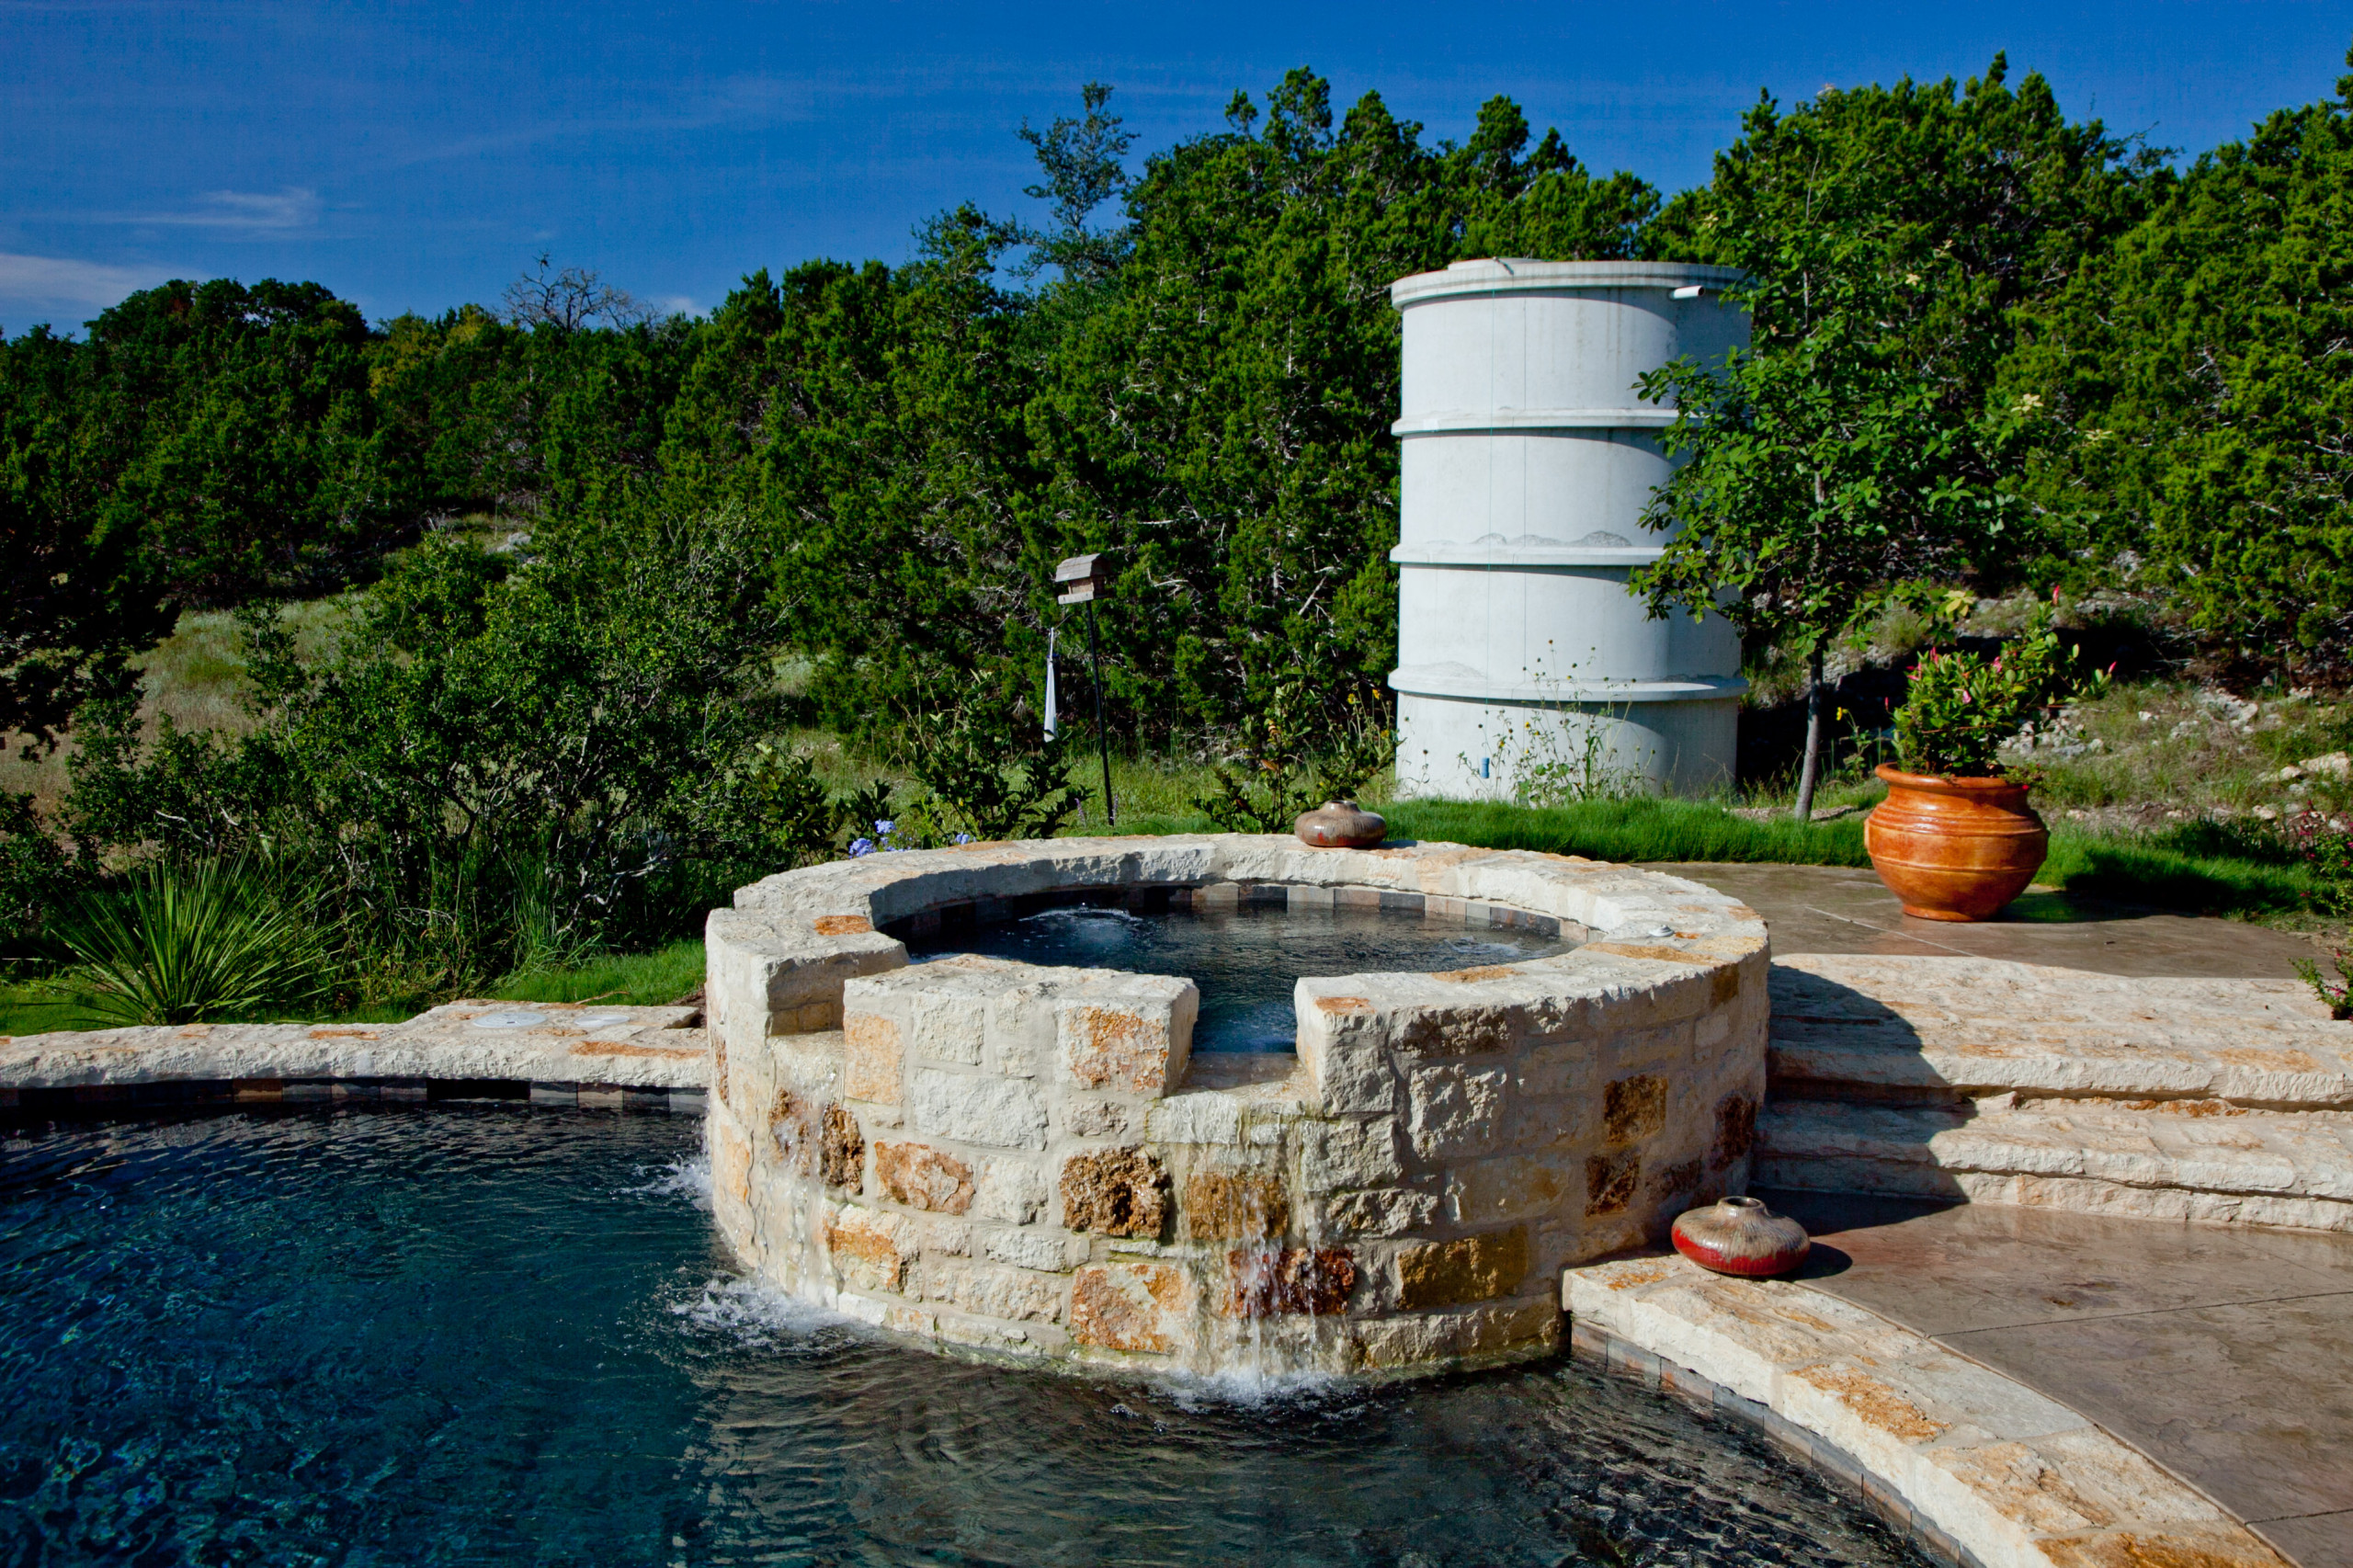 Cordillera Ranch/Boerne, Texas Round pool with Raised Spa and Pool Deck